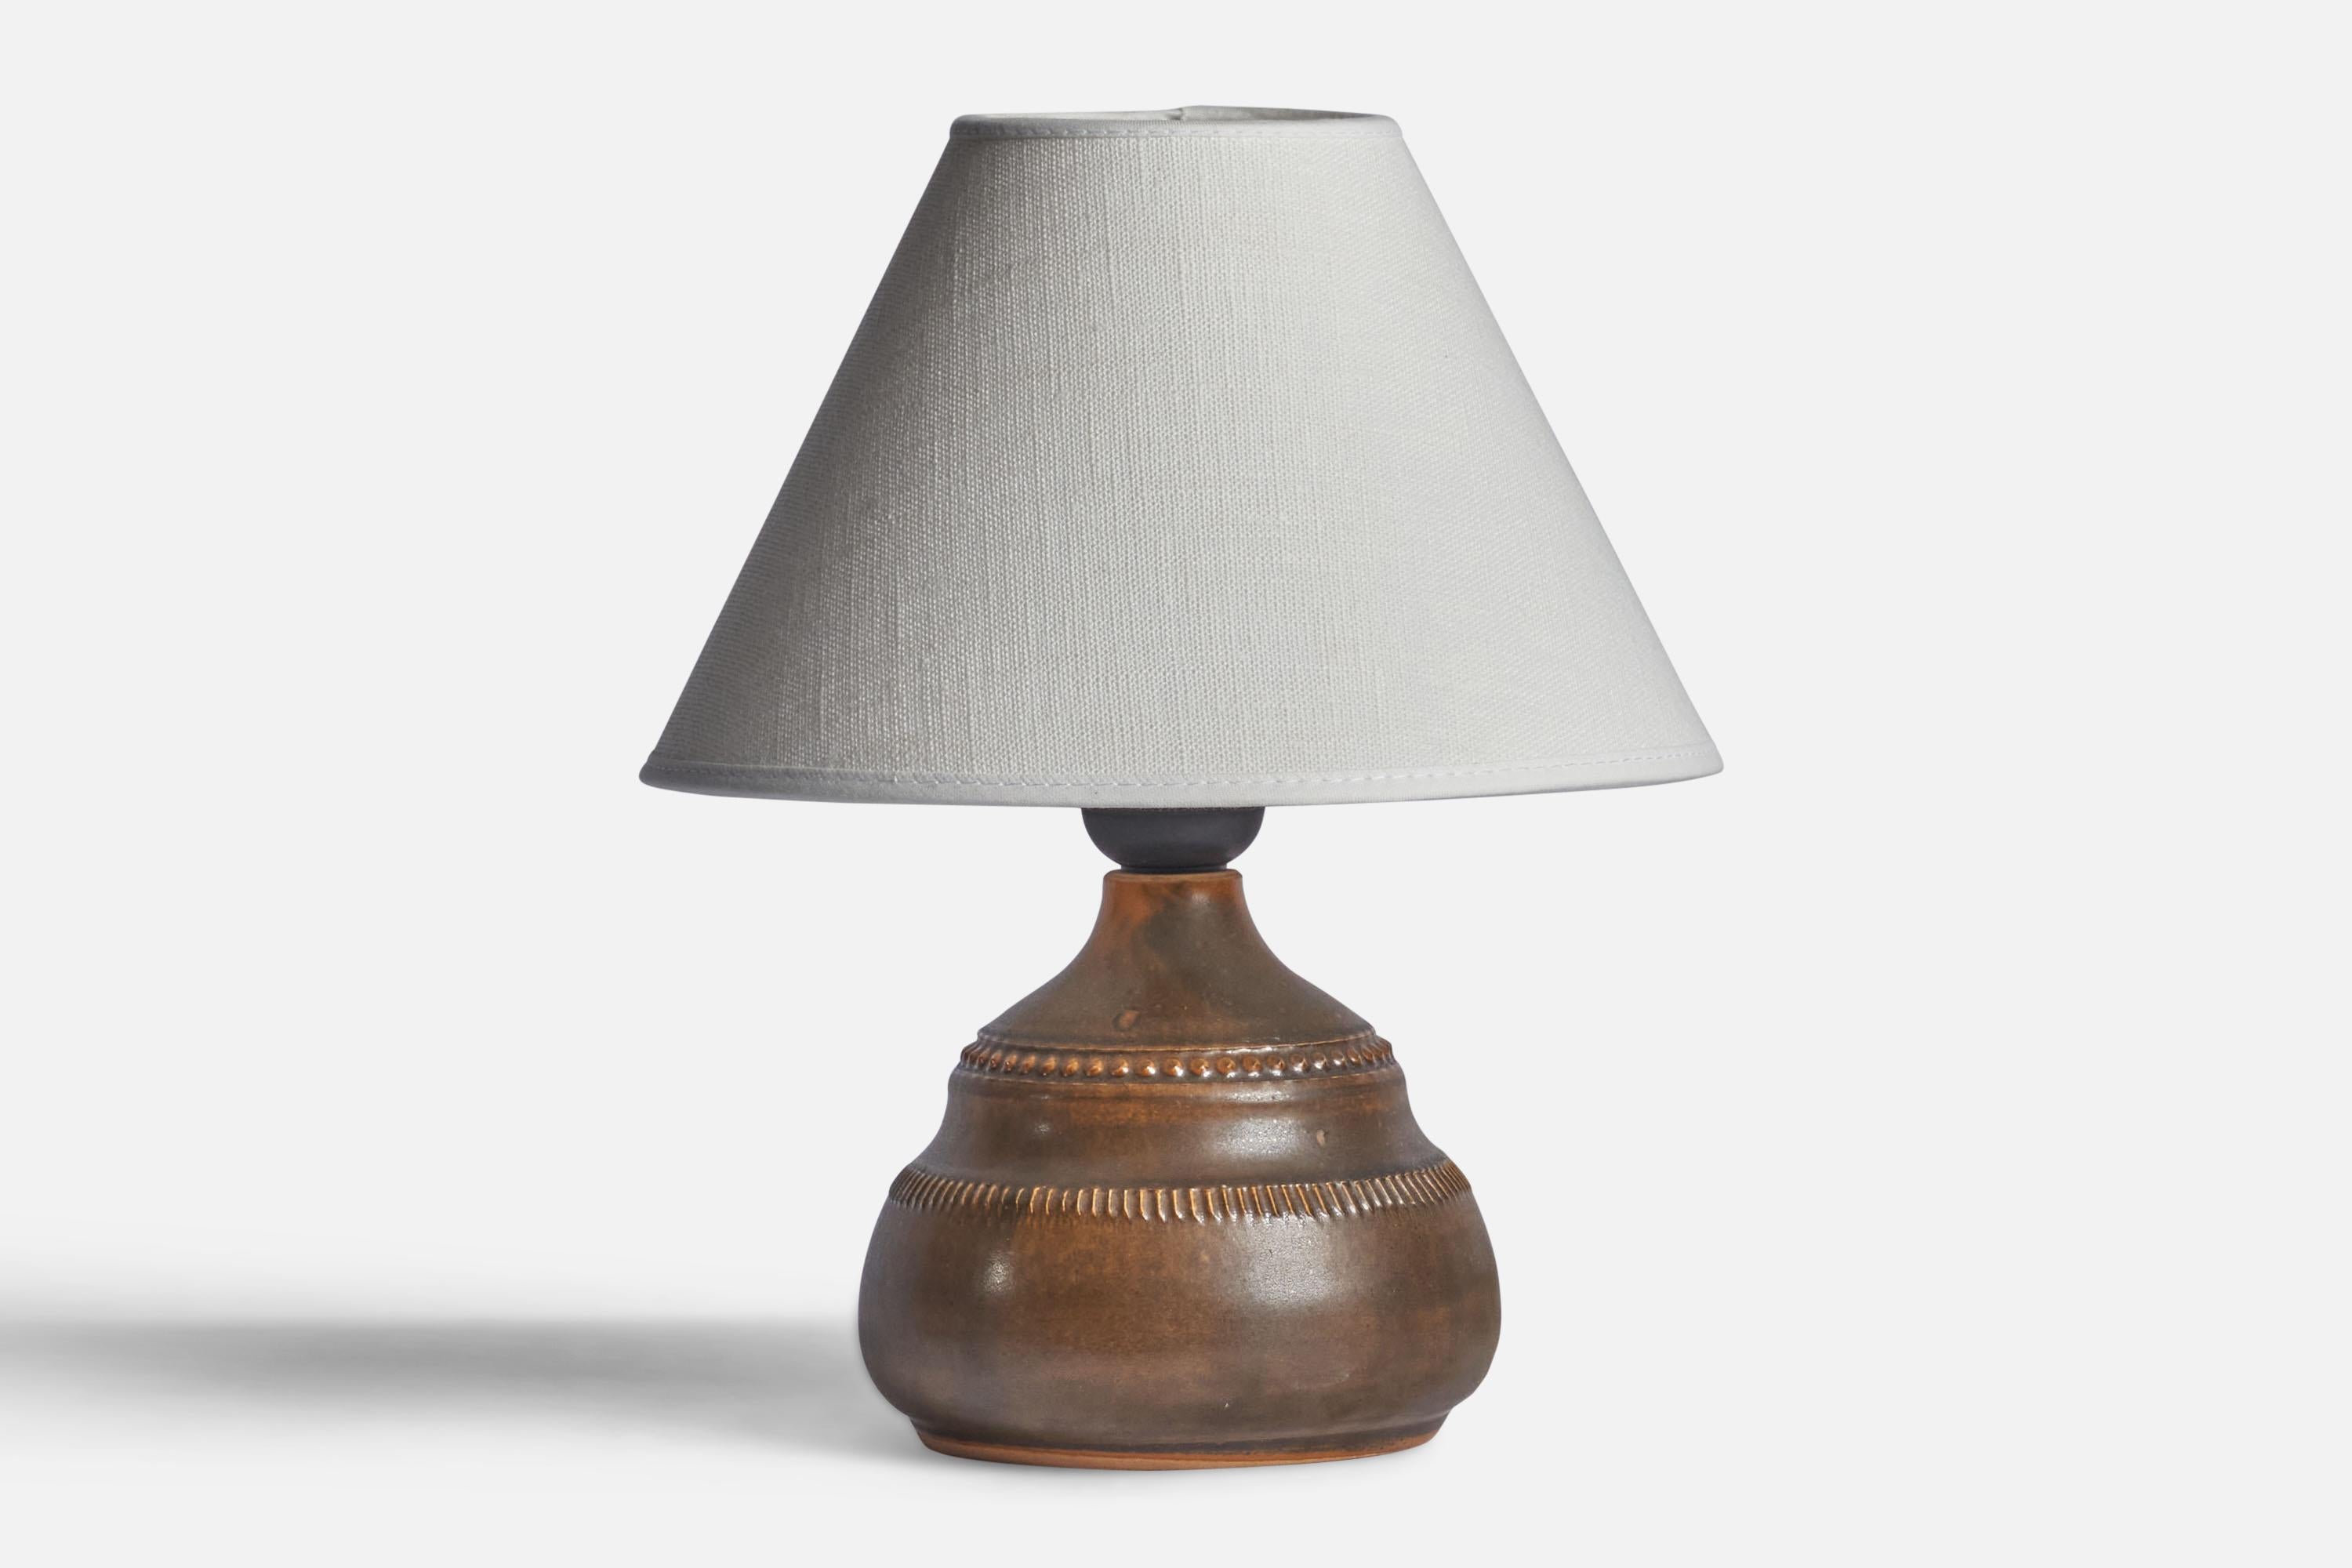 A brown-glazed stoneware table lamp designed and produced by Klase Höganäs, Sweden, c. 1960s.

Dimensions of Lamp (inches): 6.5” H x 5” Diameter
Dimensions of Shade (inches): 3” Top Diameter x 8” Bottom Diameter x 5.4” H
Dimensions of Lamp with